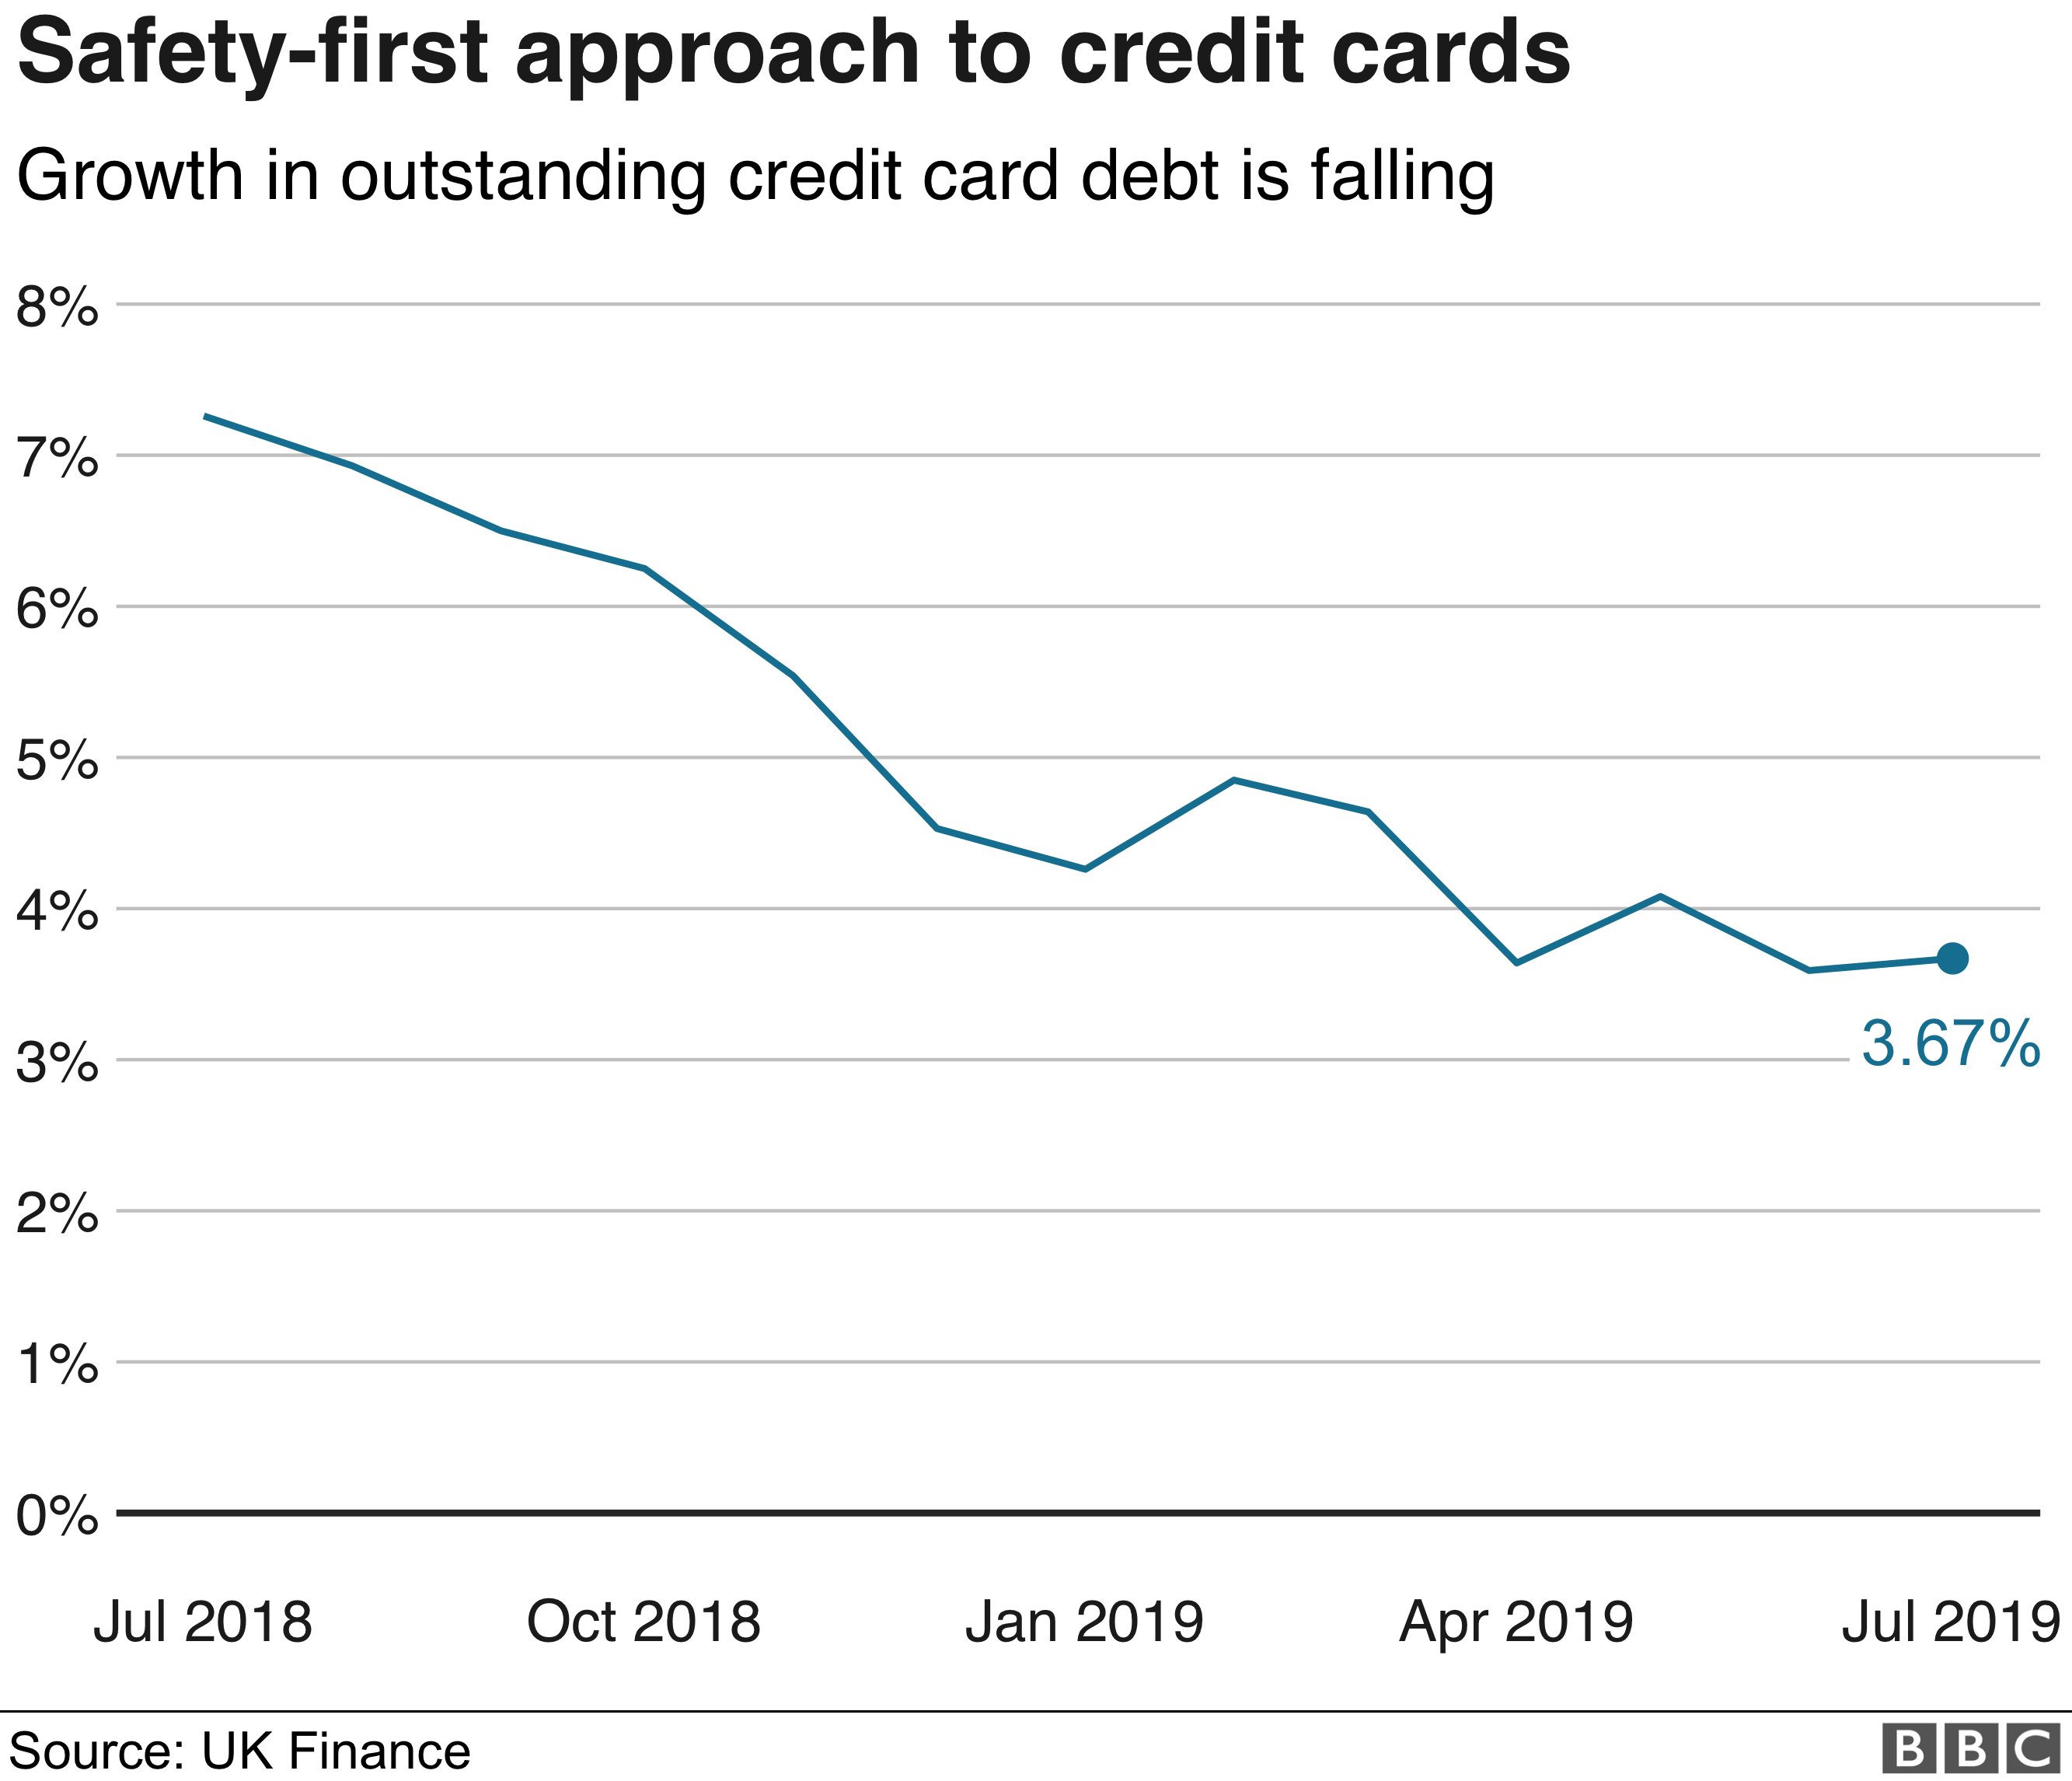 Annual growth rate in outstanding credit card debt